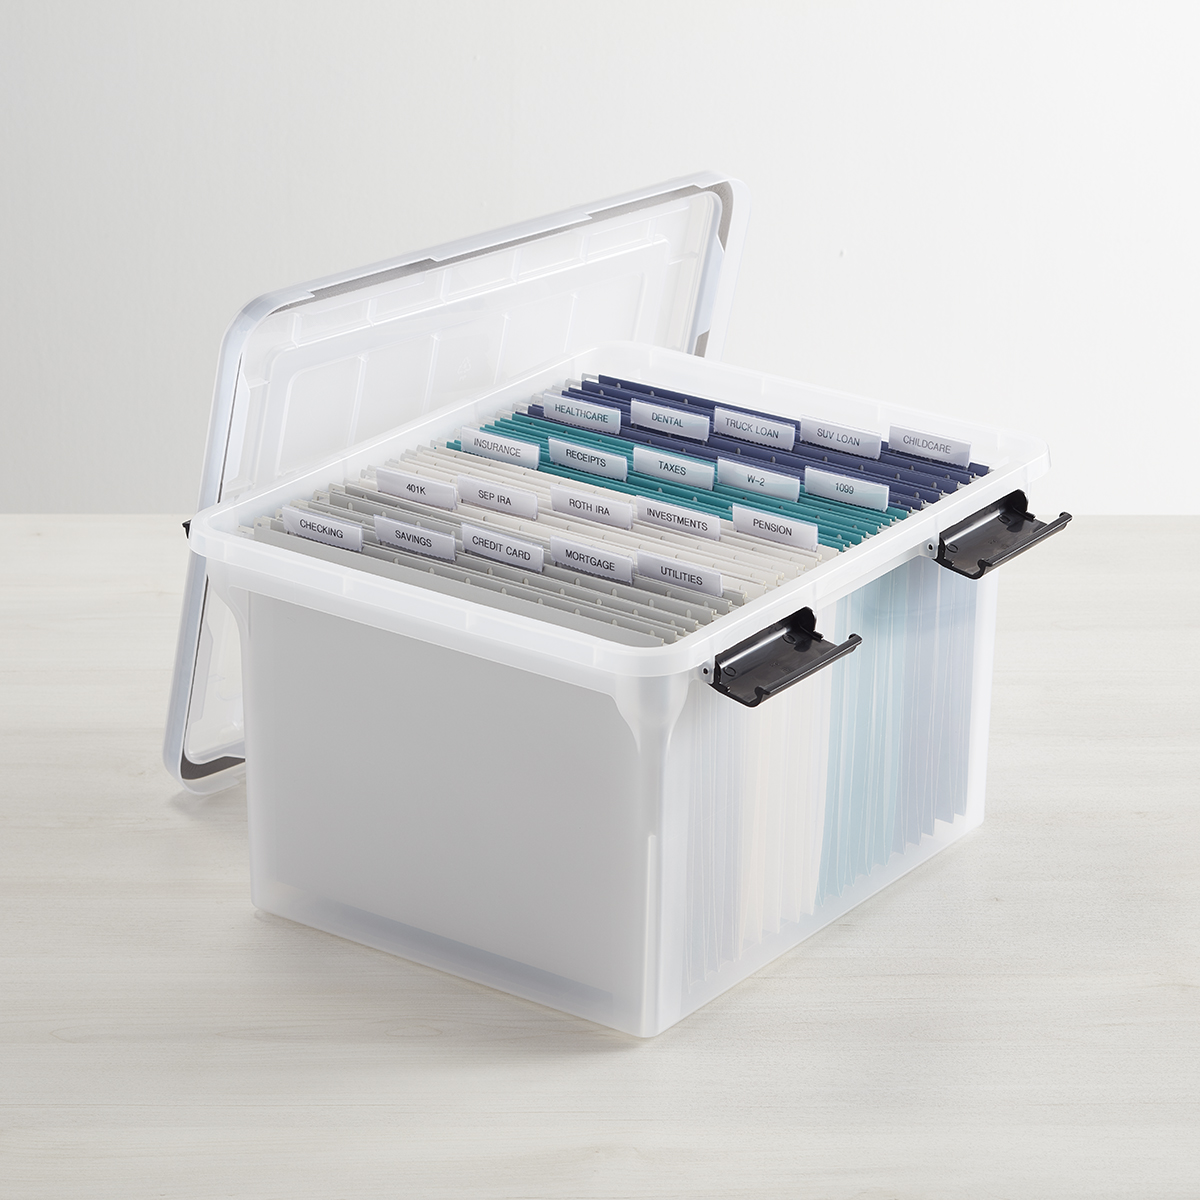 https://www.containerstore.com/catalogimages/406760/10051572-weathertight-file-box-clear.jpg